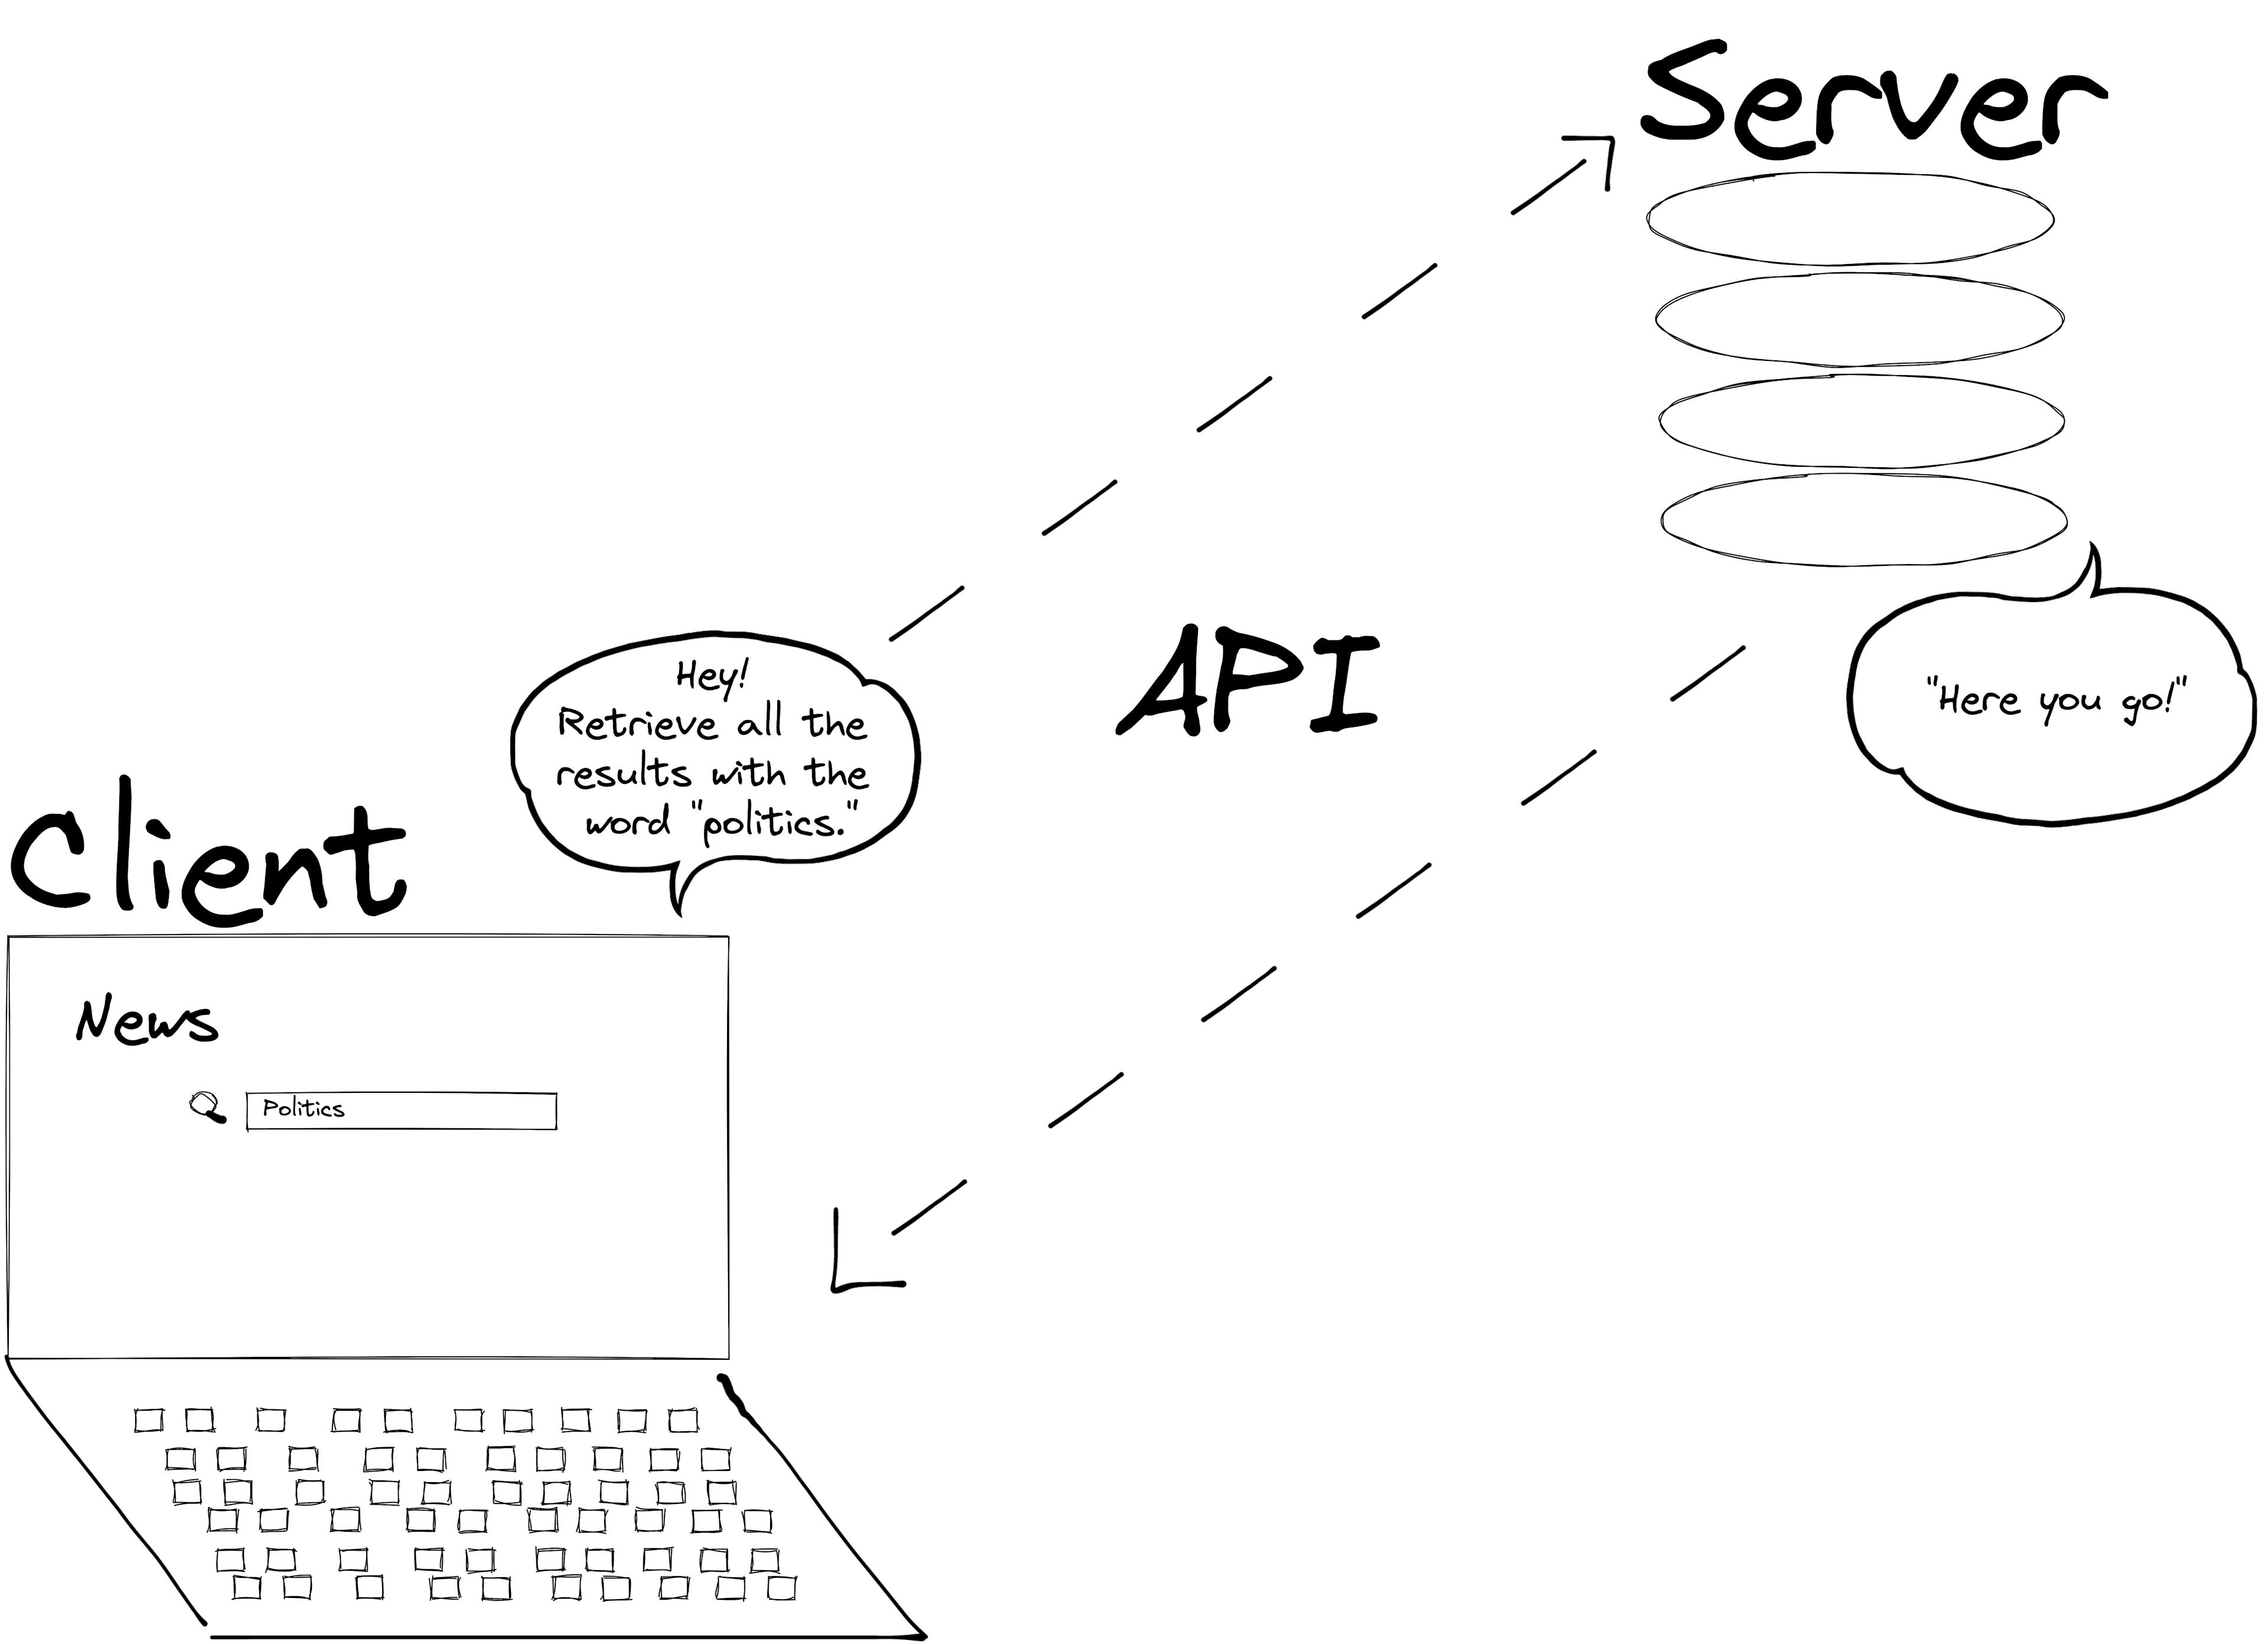 Diagram that shows a computer (the client) making an API request when you search for the term "politics" on a news website. The API request goes to another computer (the server) that responds to the request; in this drawing the server says, "Here you go!"